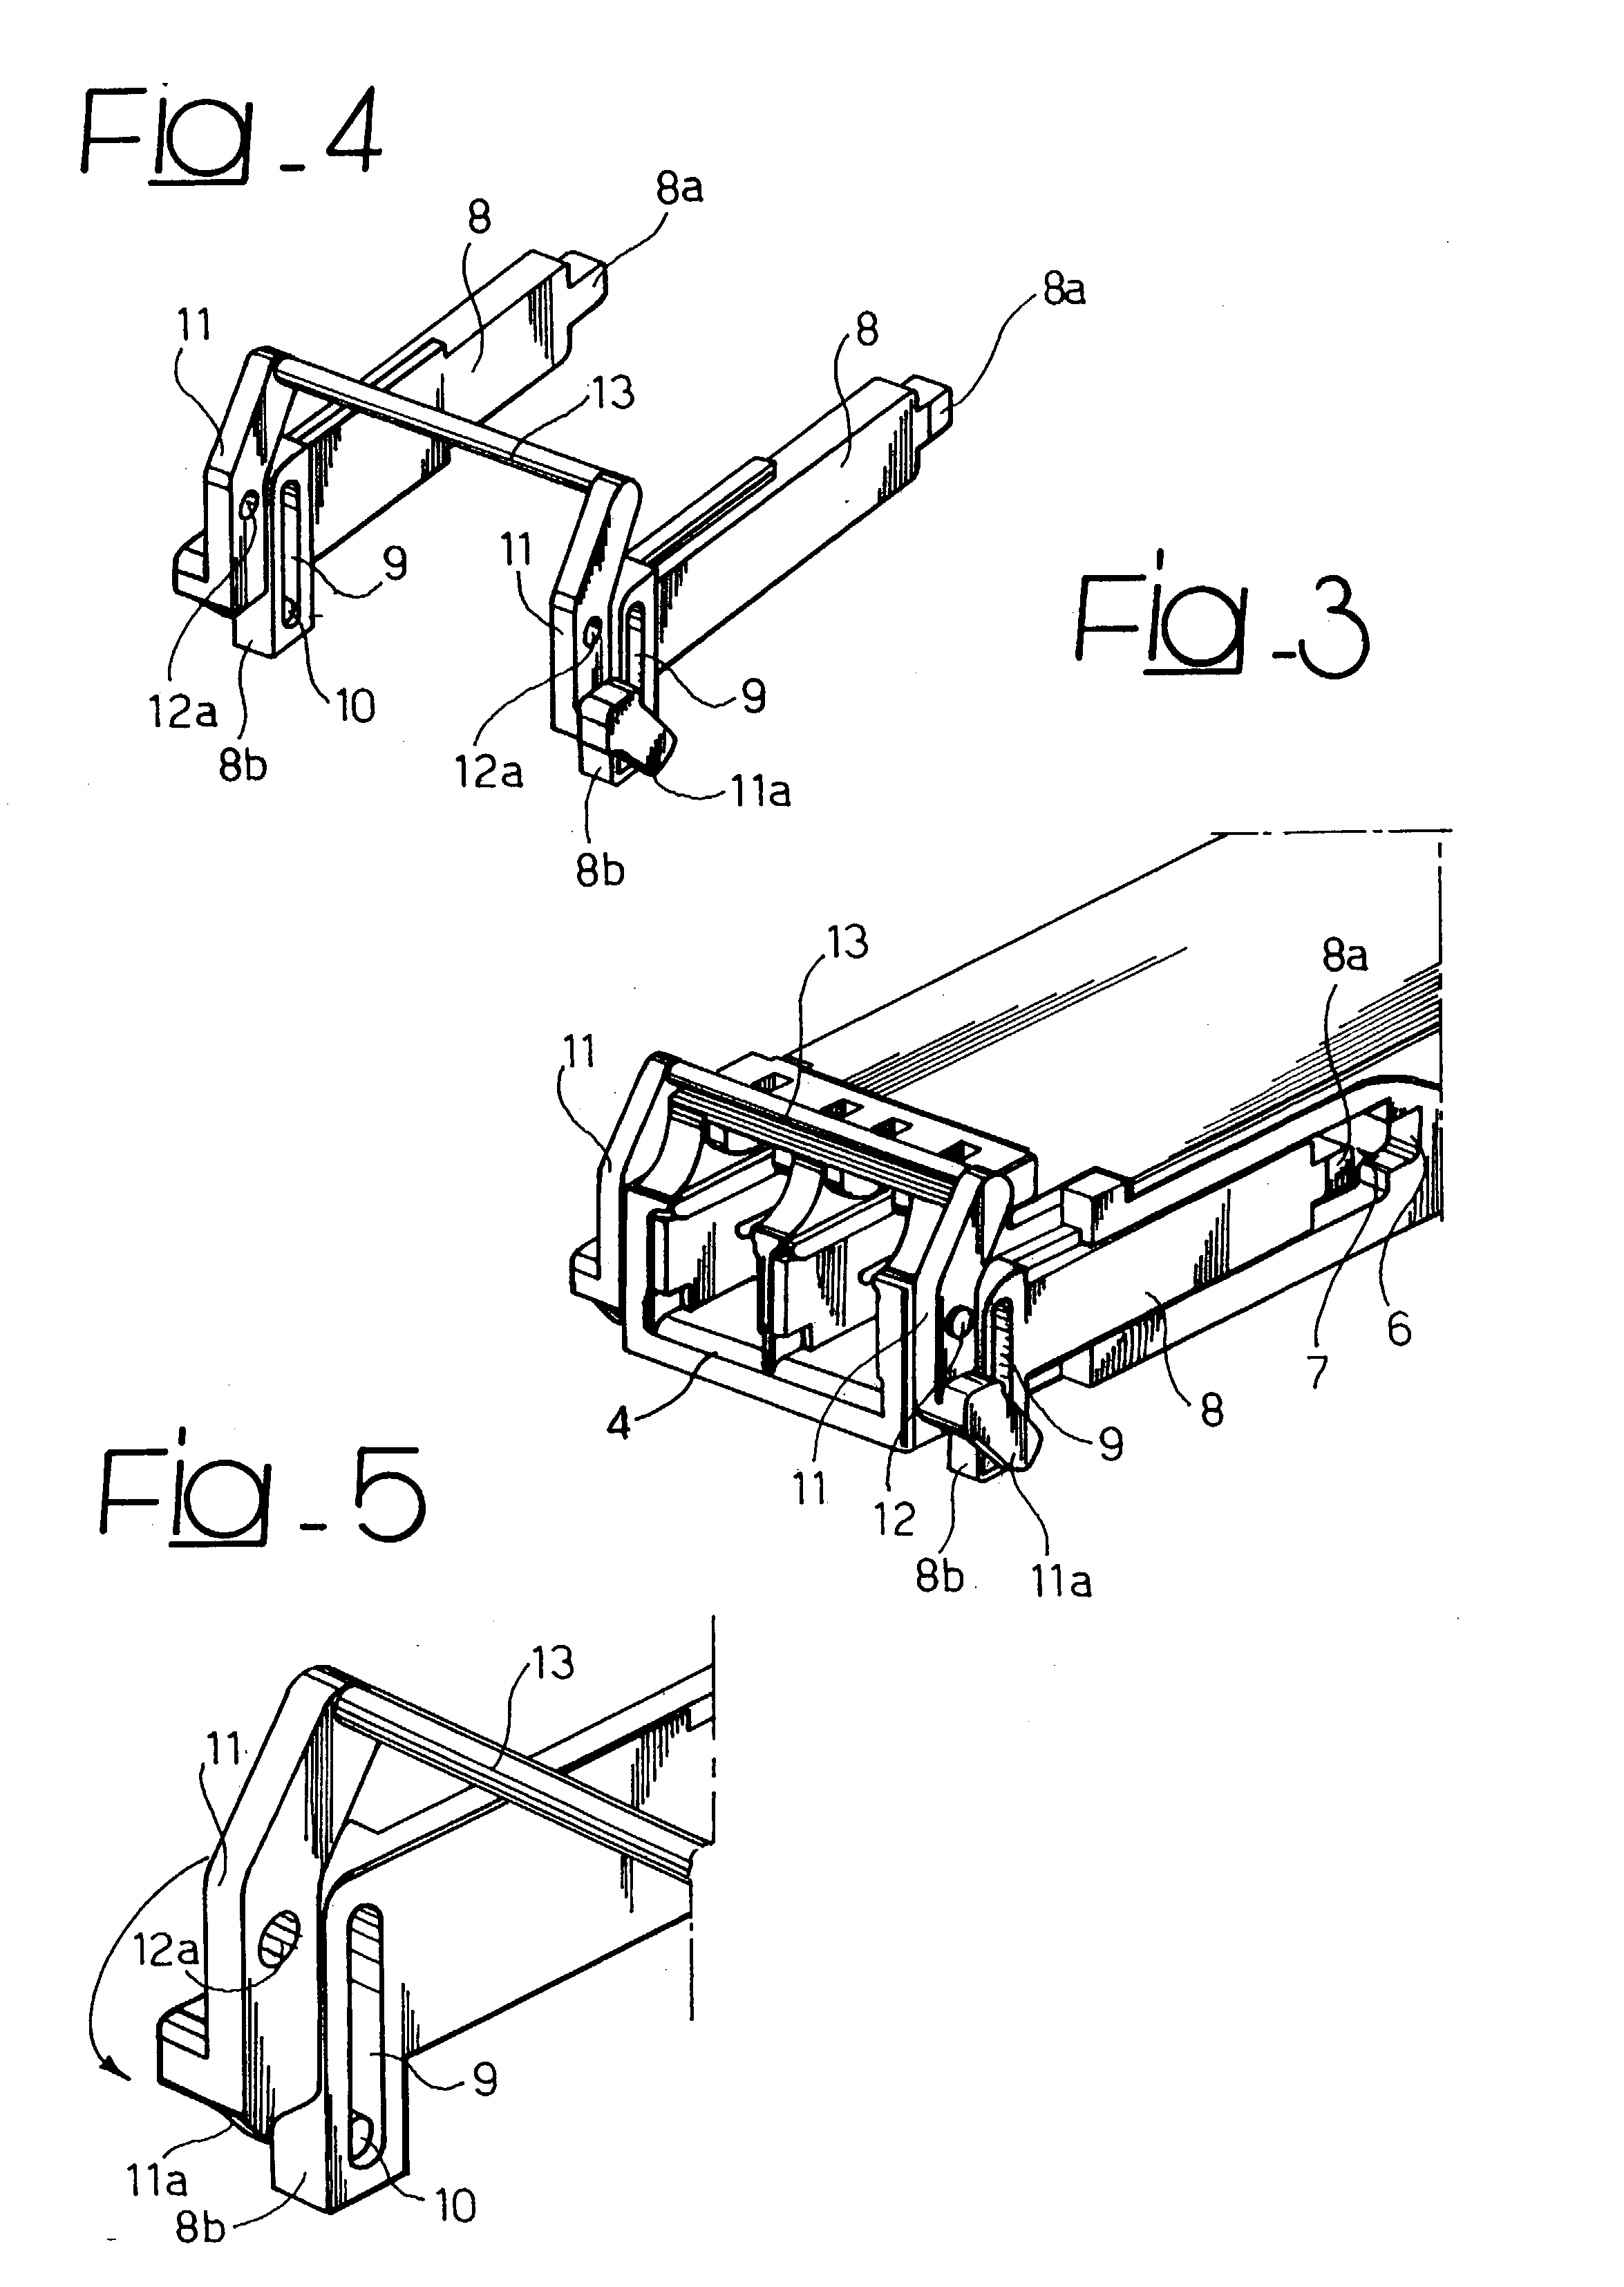 Mounting arrangement for plug-in modules